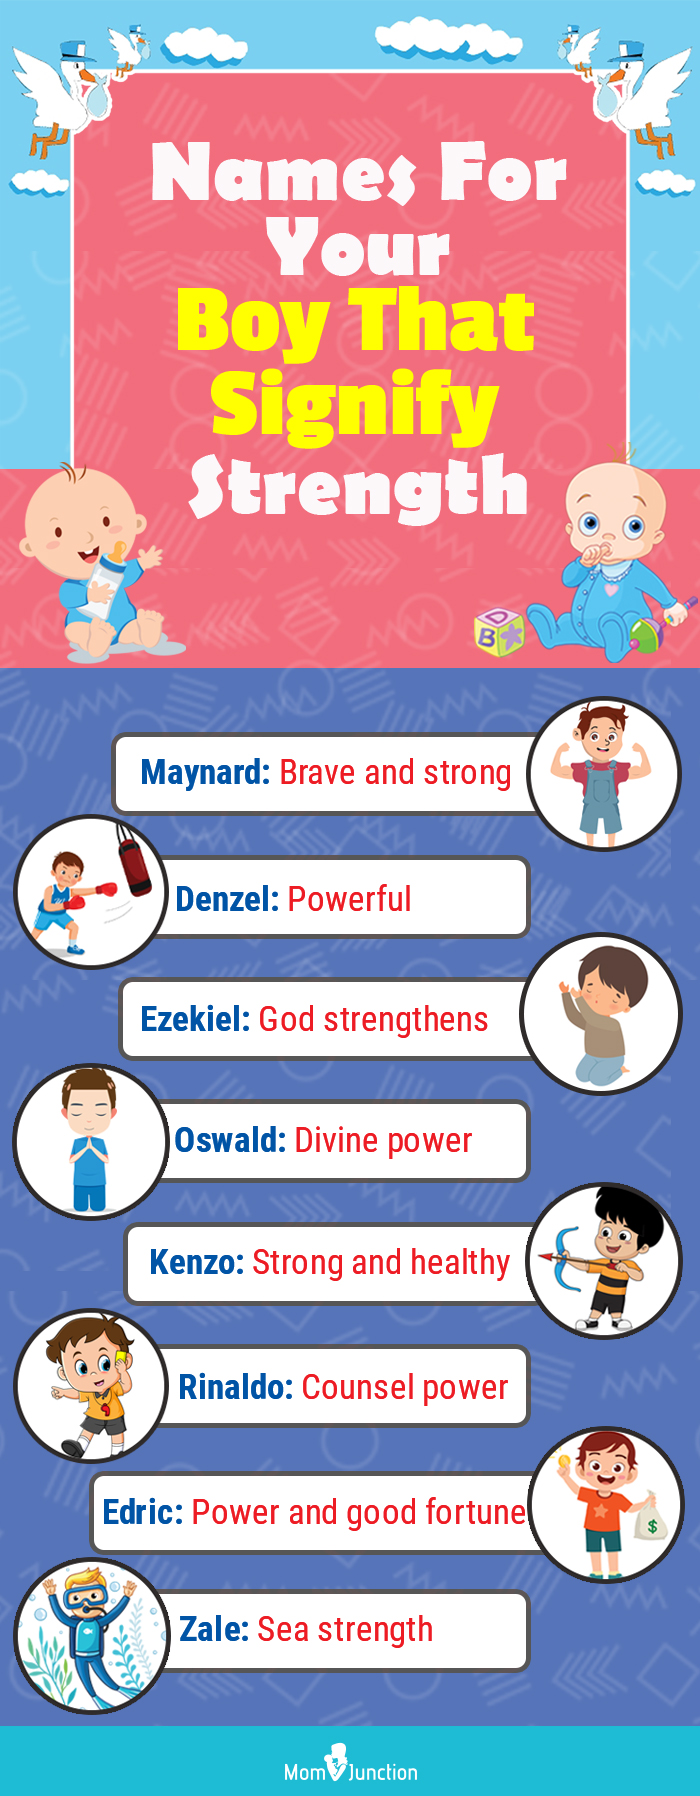 names for your boy that signify strength (infographic)